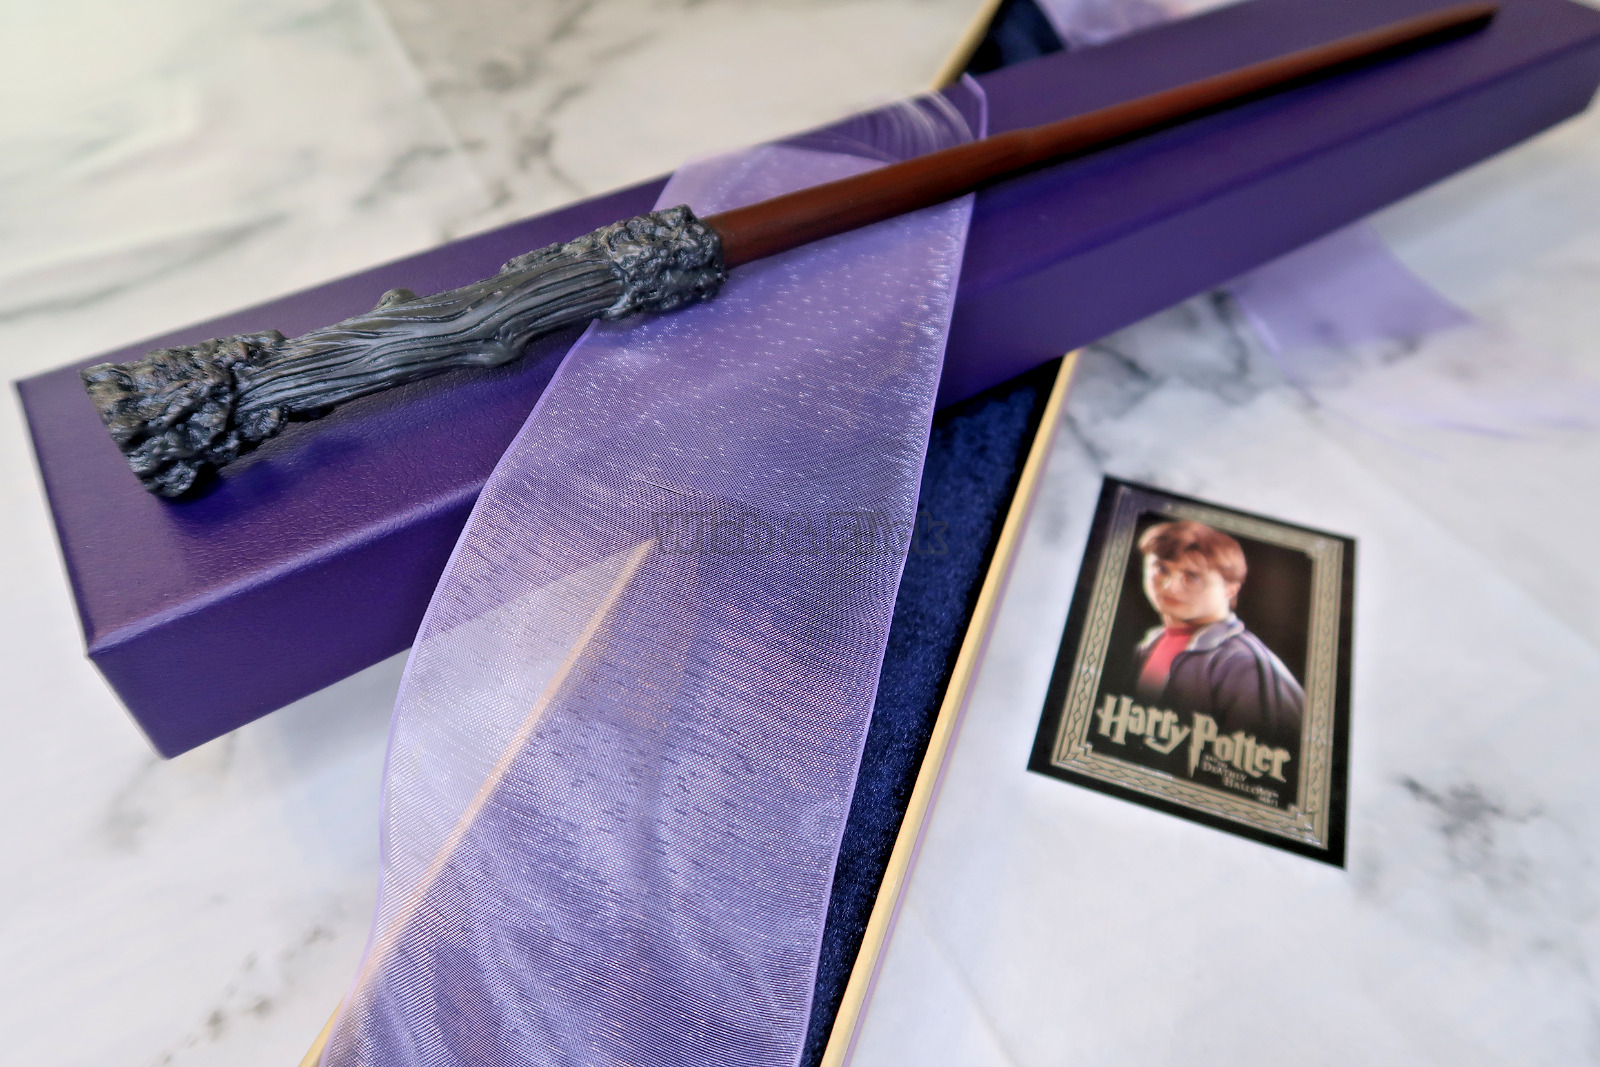 Harry Potter ⚡️ Wands in beautiful presentation box with cards . UK seller 🇬🇧